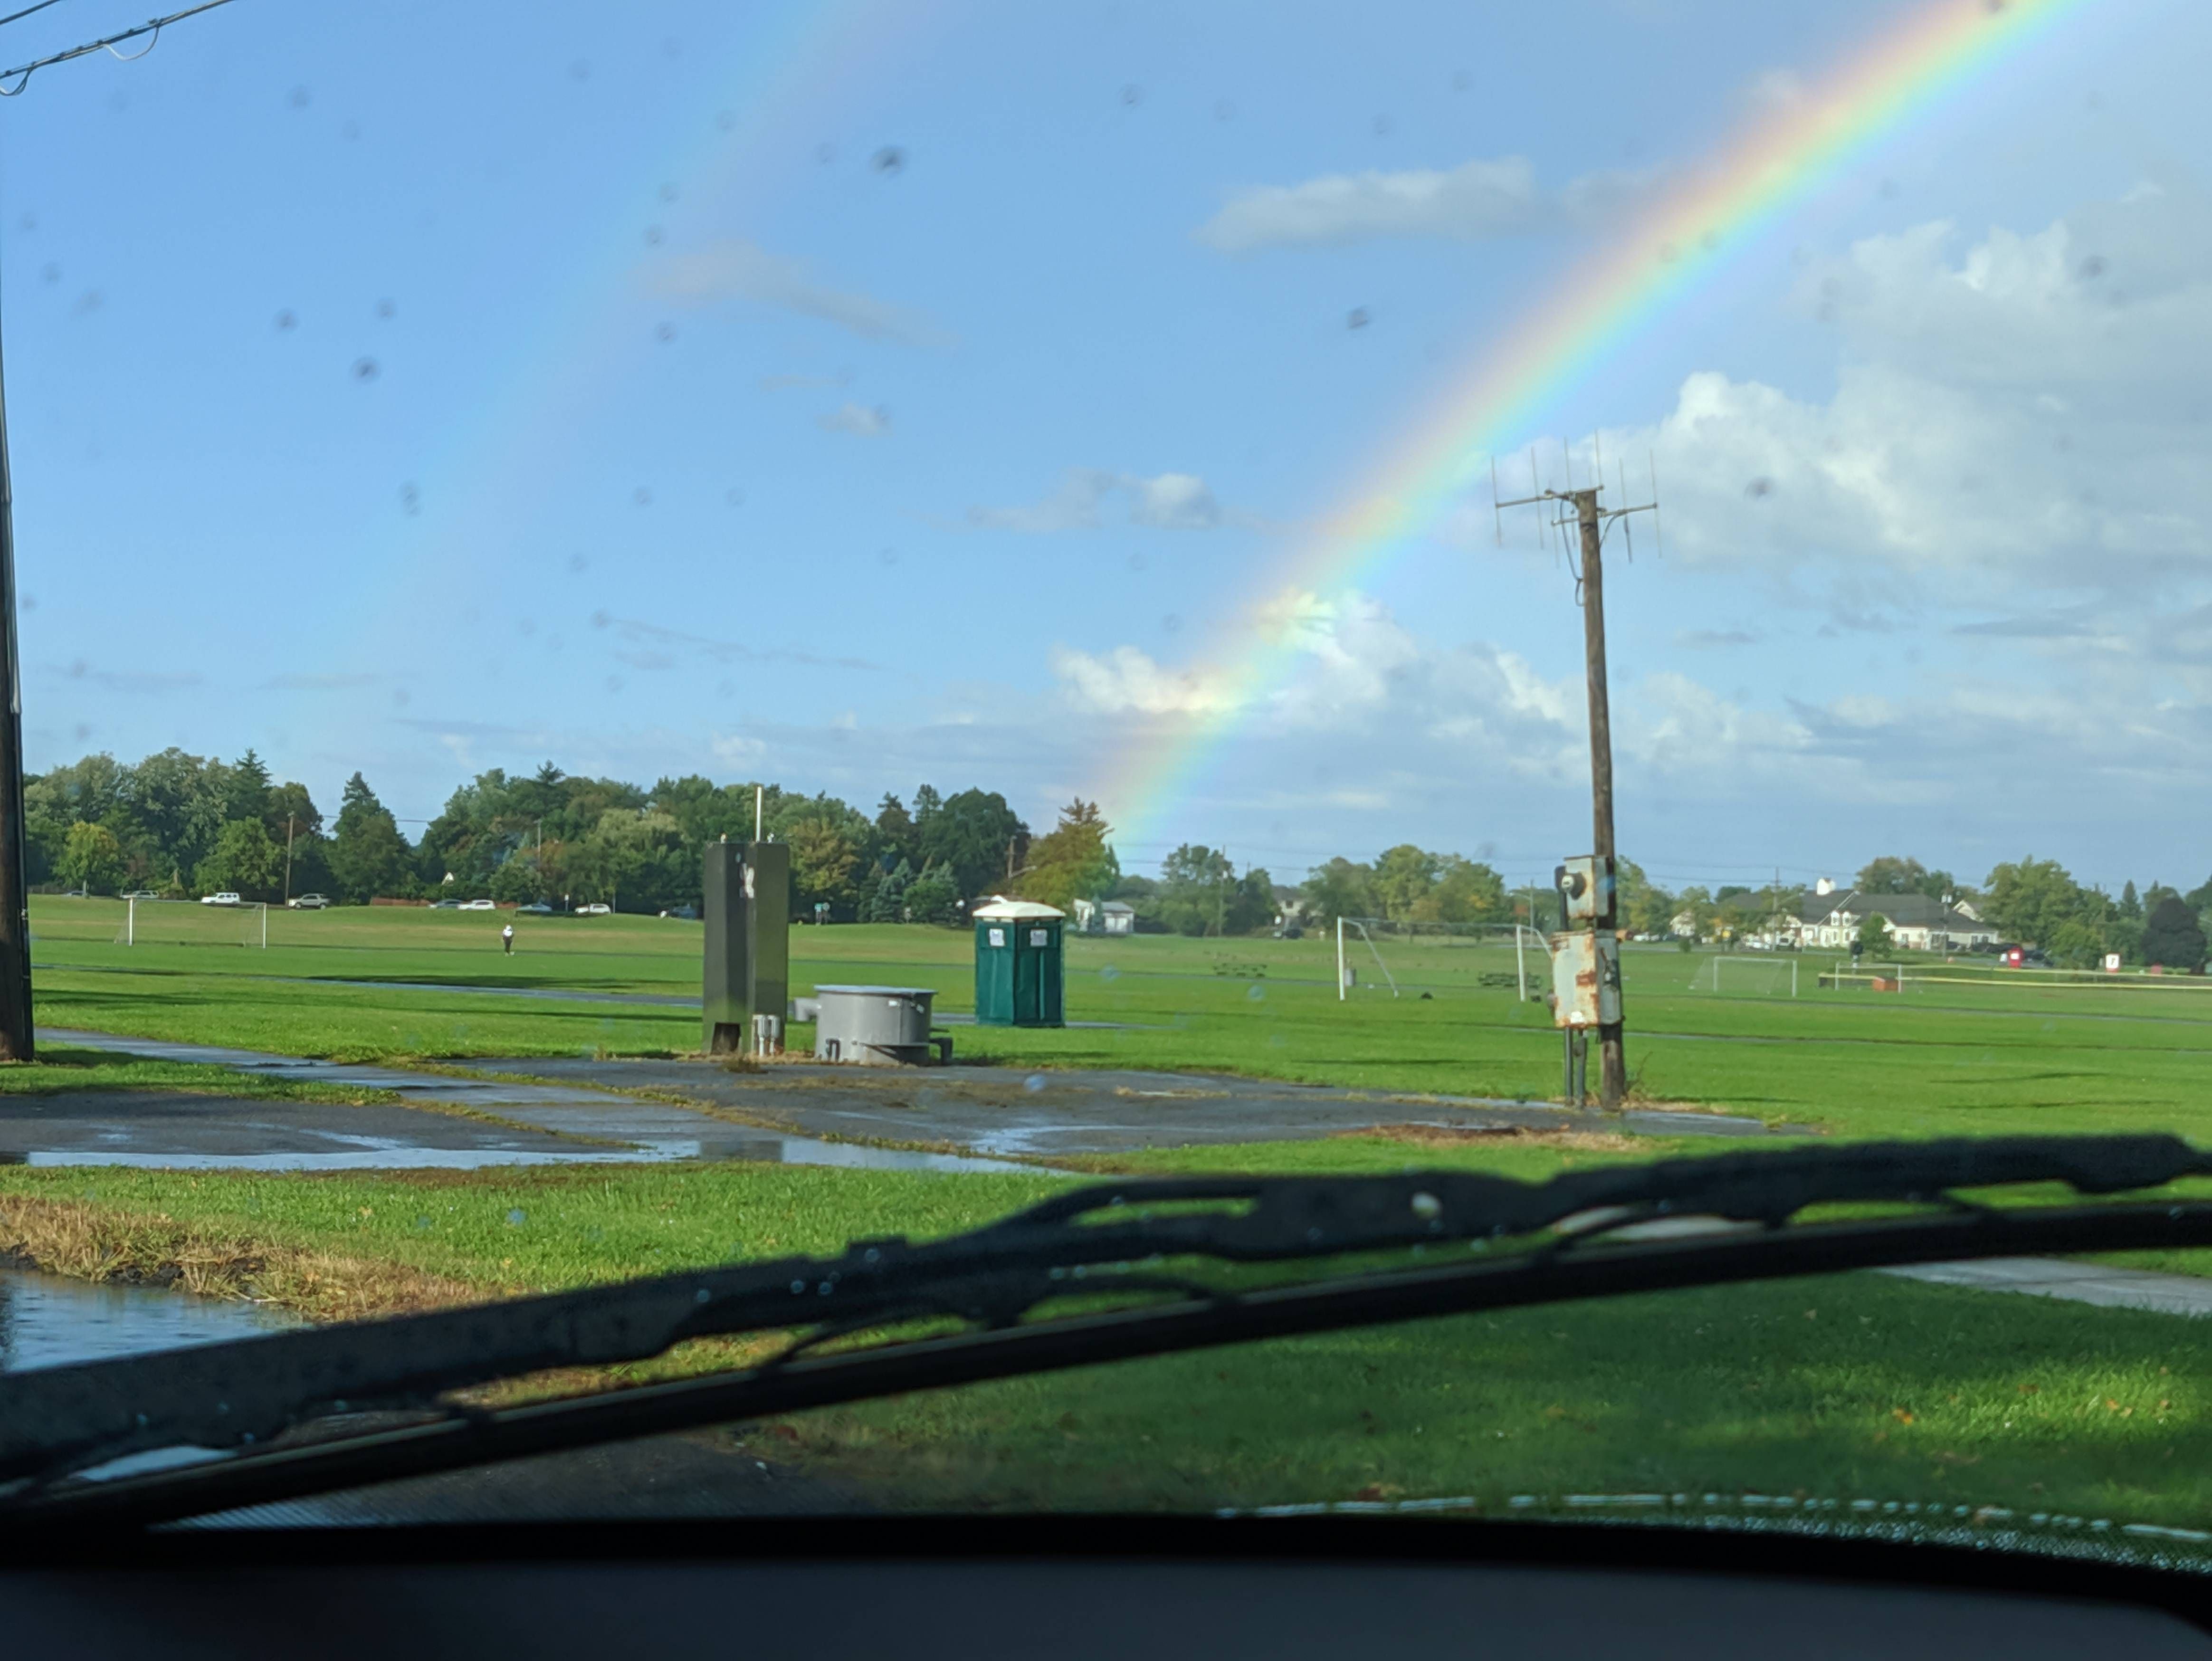 I found the pot of gold